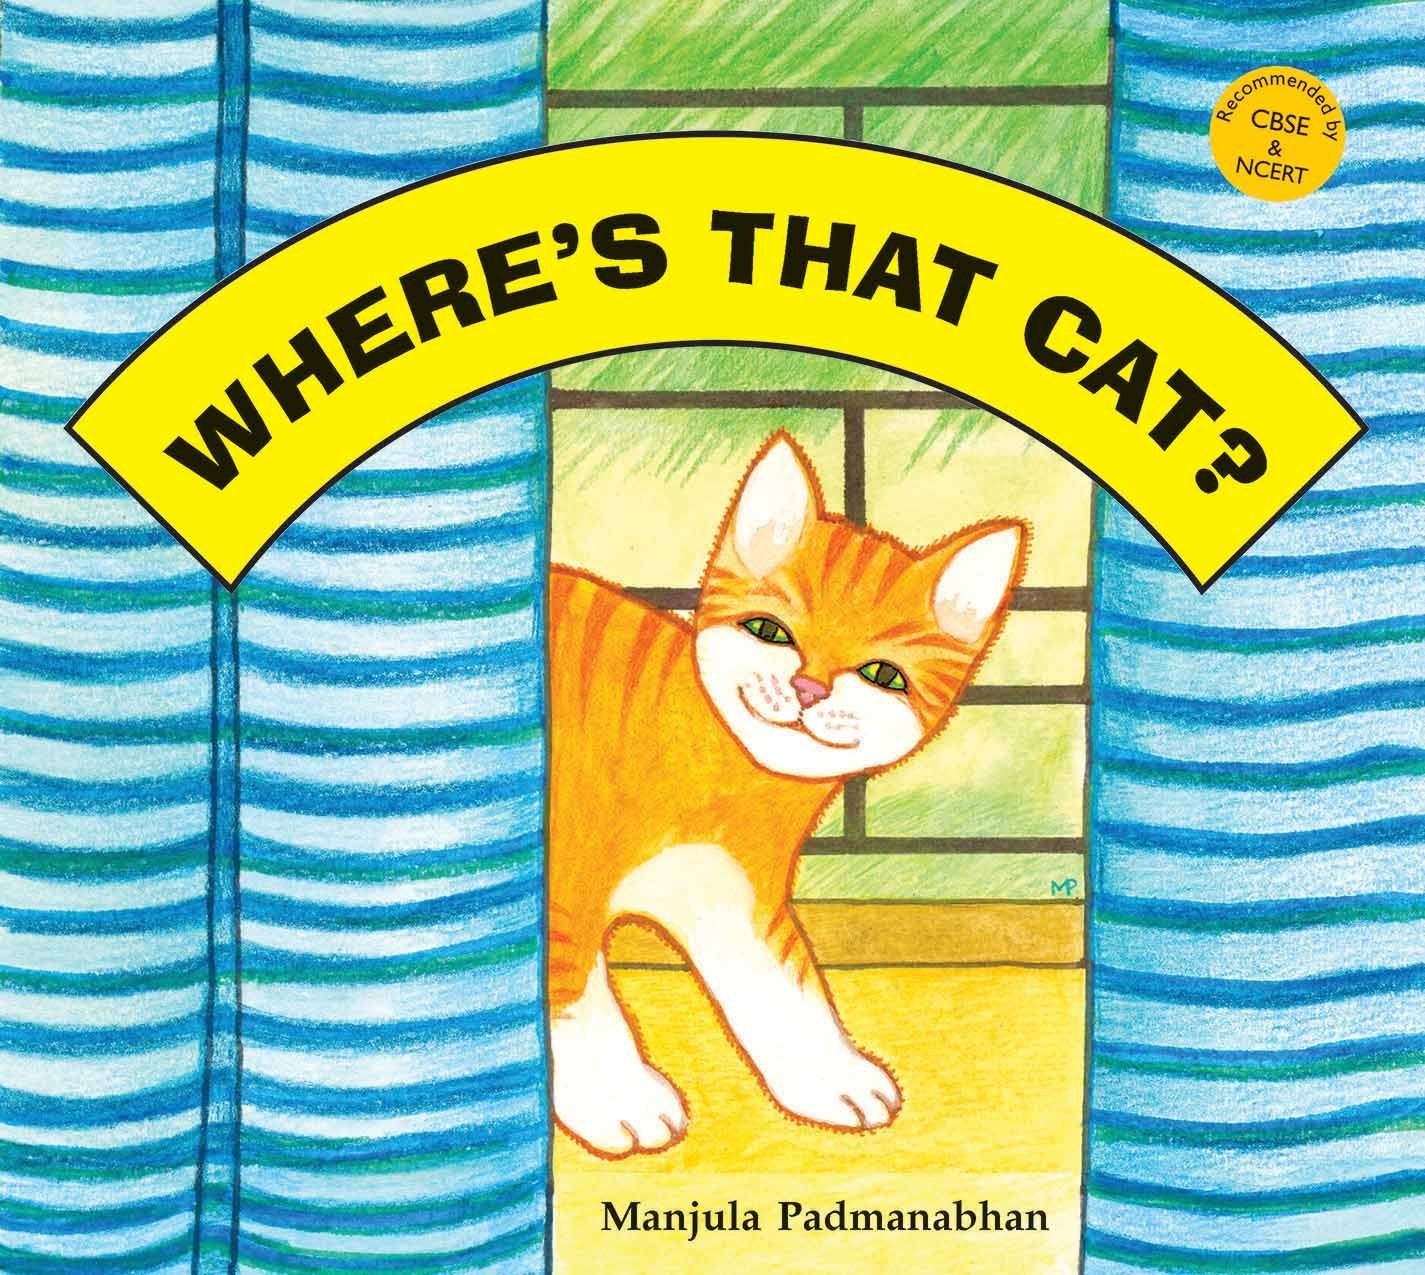 Where's That Cat?